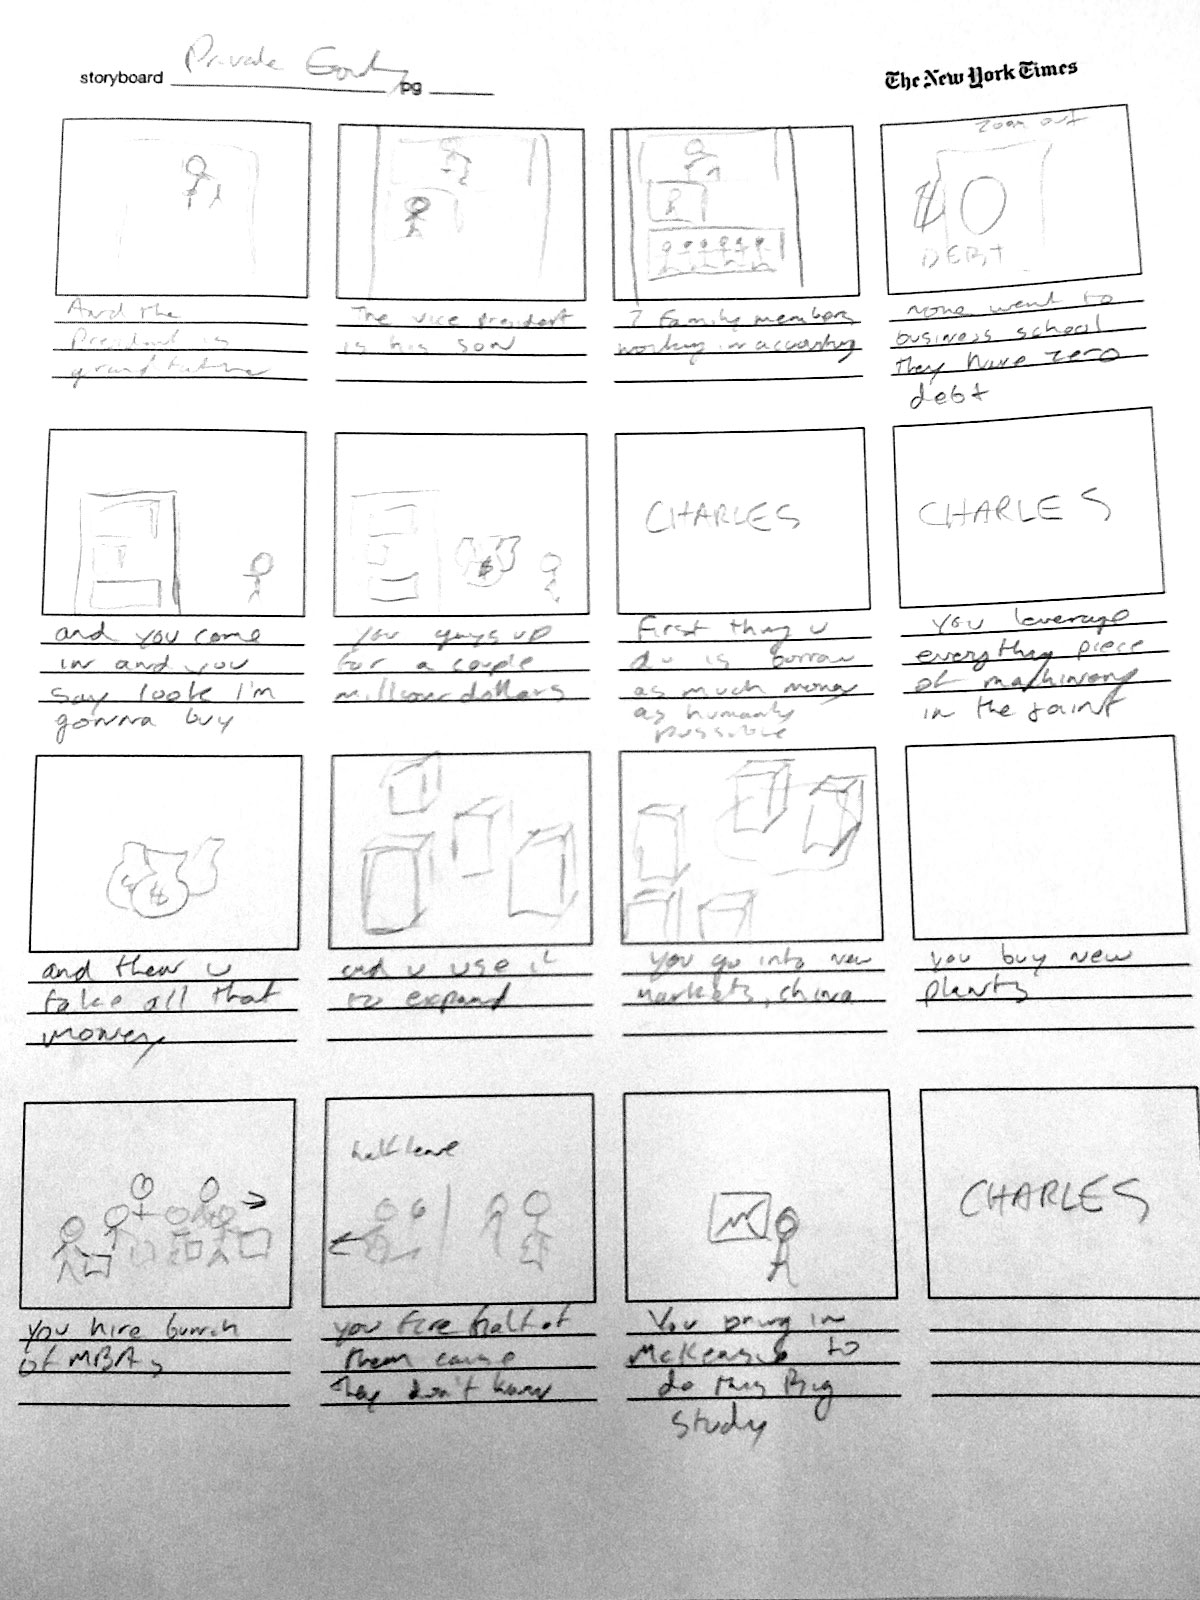 storyboard template workflow effects equity private digitalartwork